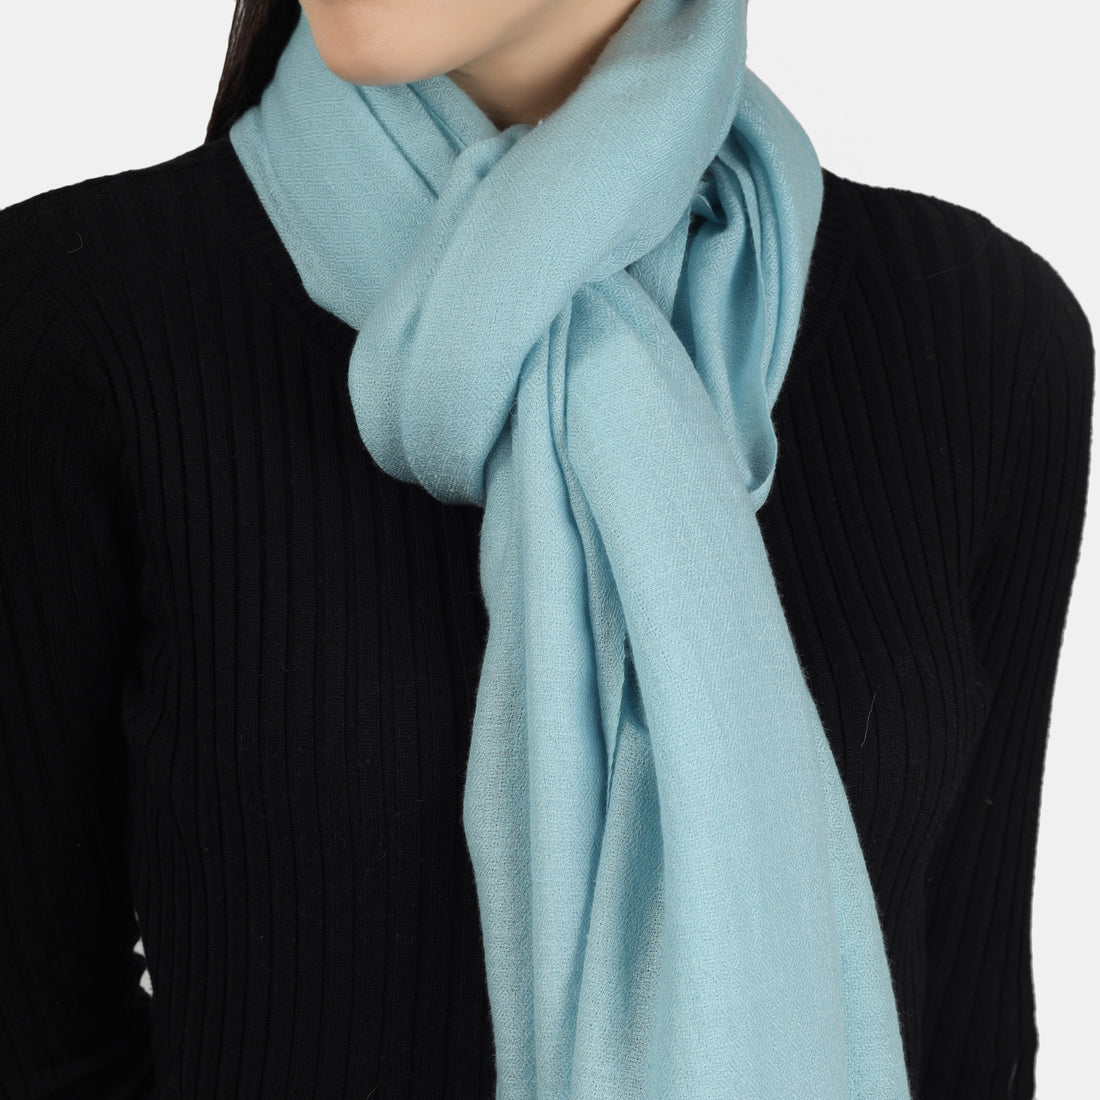 The Benefits of Owning a Turquoise Cashmere Scarf